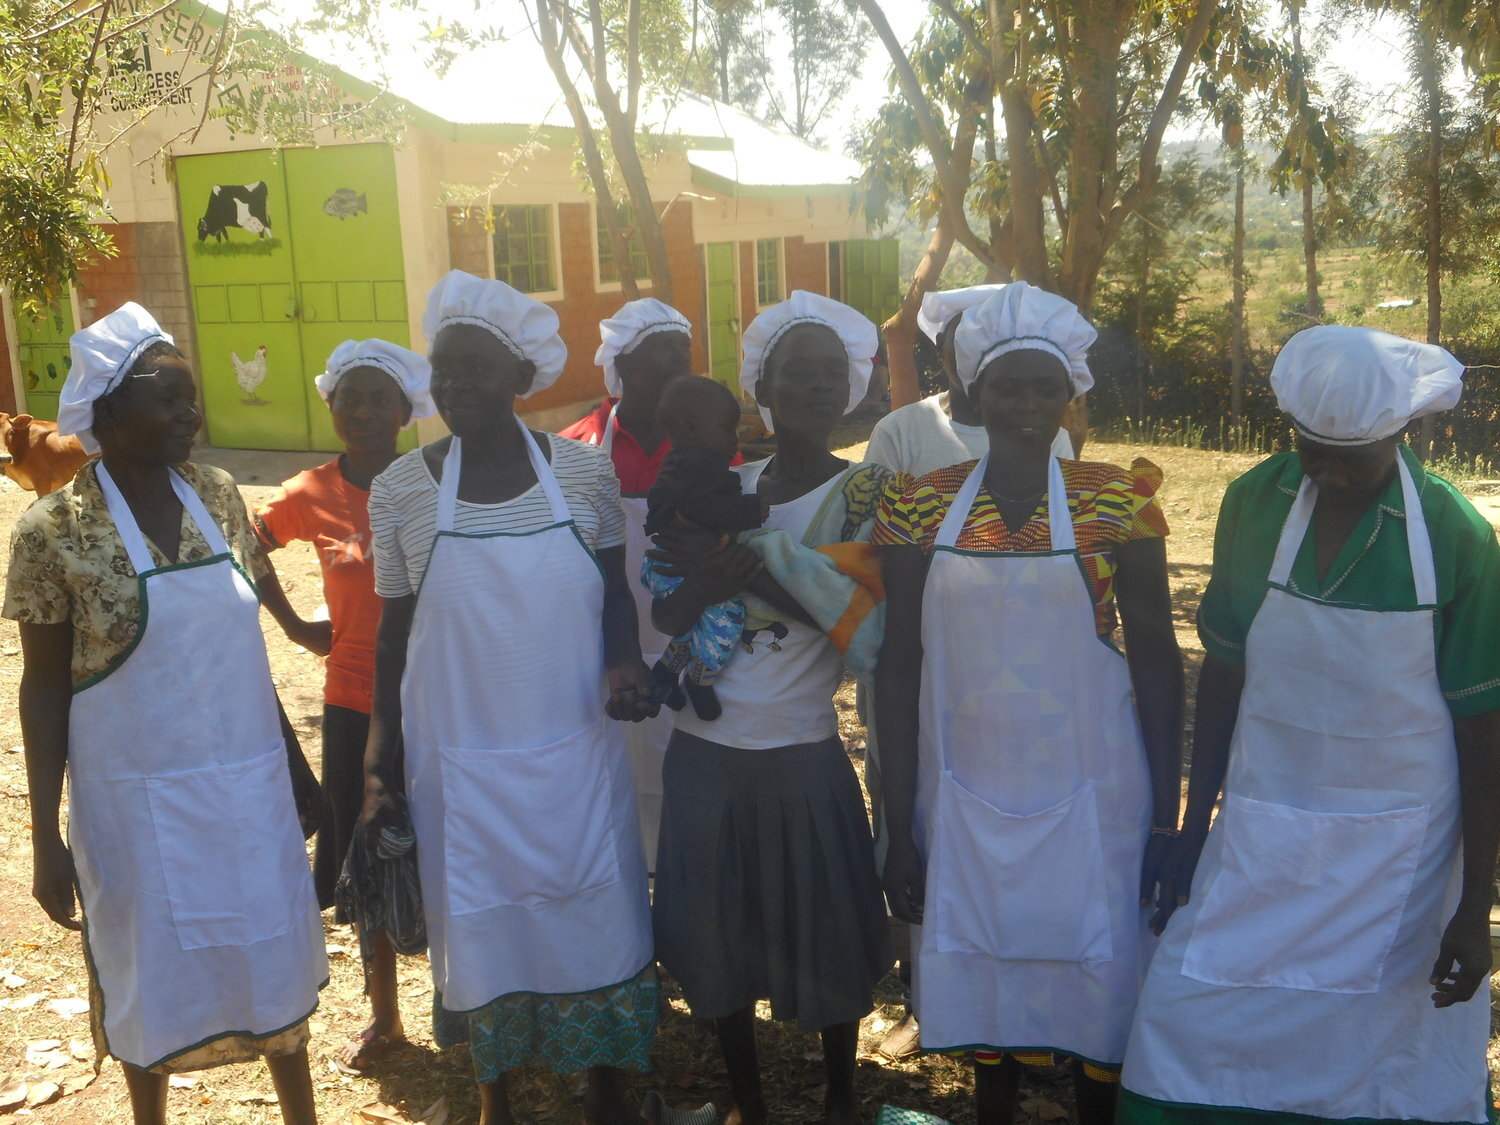 Eight village women who are in the microfinance Woman’s group have gathered with their chef’s hats and aprons in a yard with trees and colorful buildings. One of them is holding a baby.